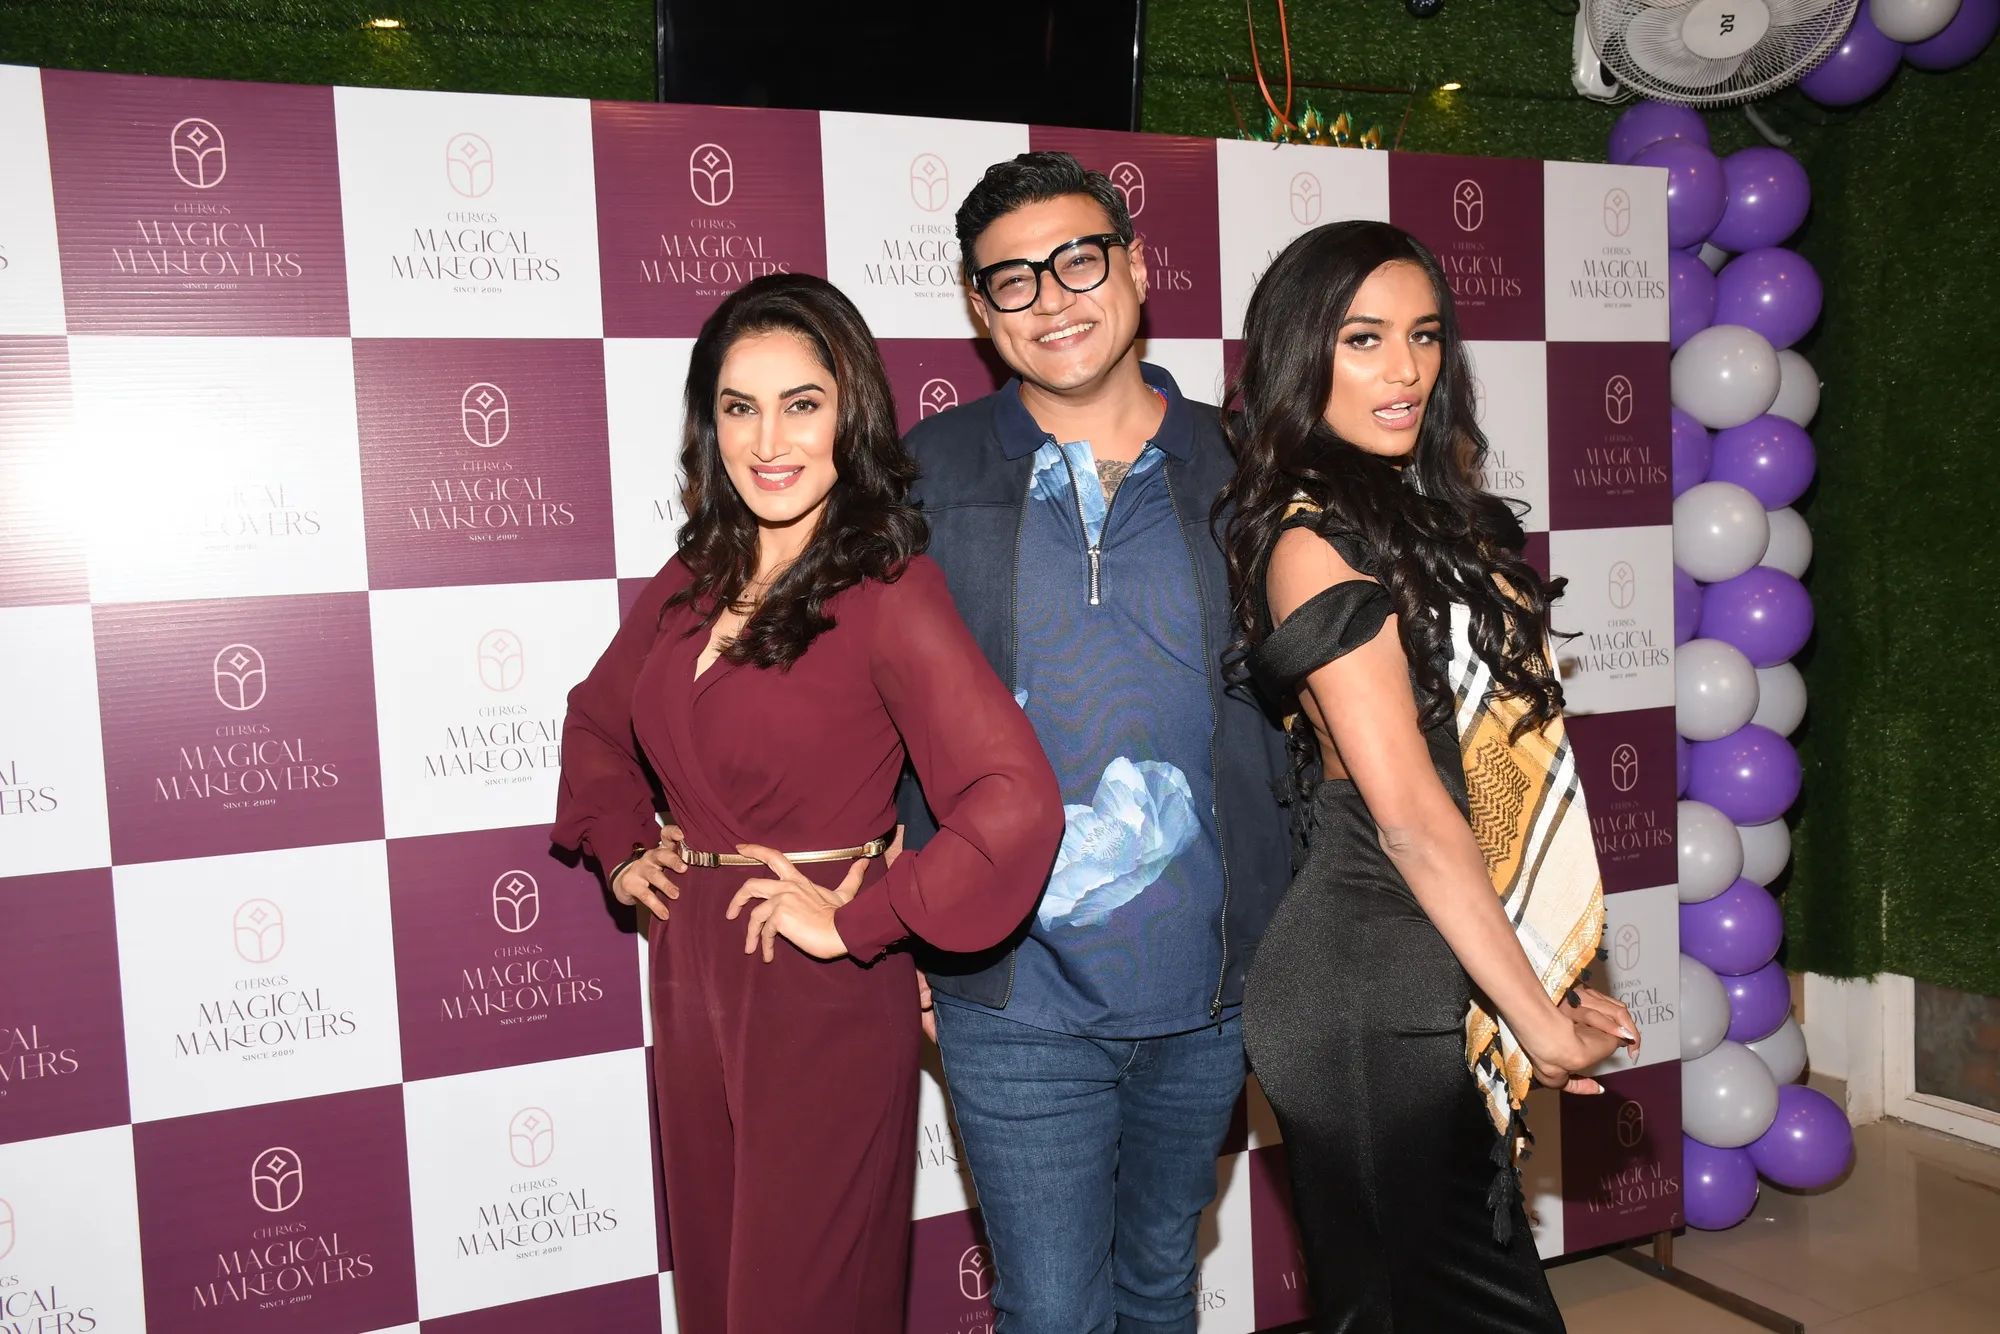 002. Smita Gondkar with Cherag Bambboat and Poonam Pandey during the launch of Magical Makeovers by Cherag Bambboat at Lucknow DSC_4138